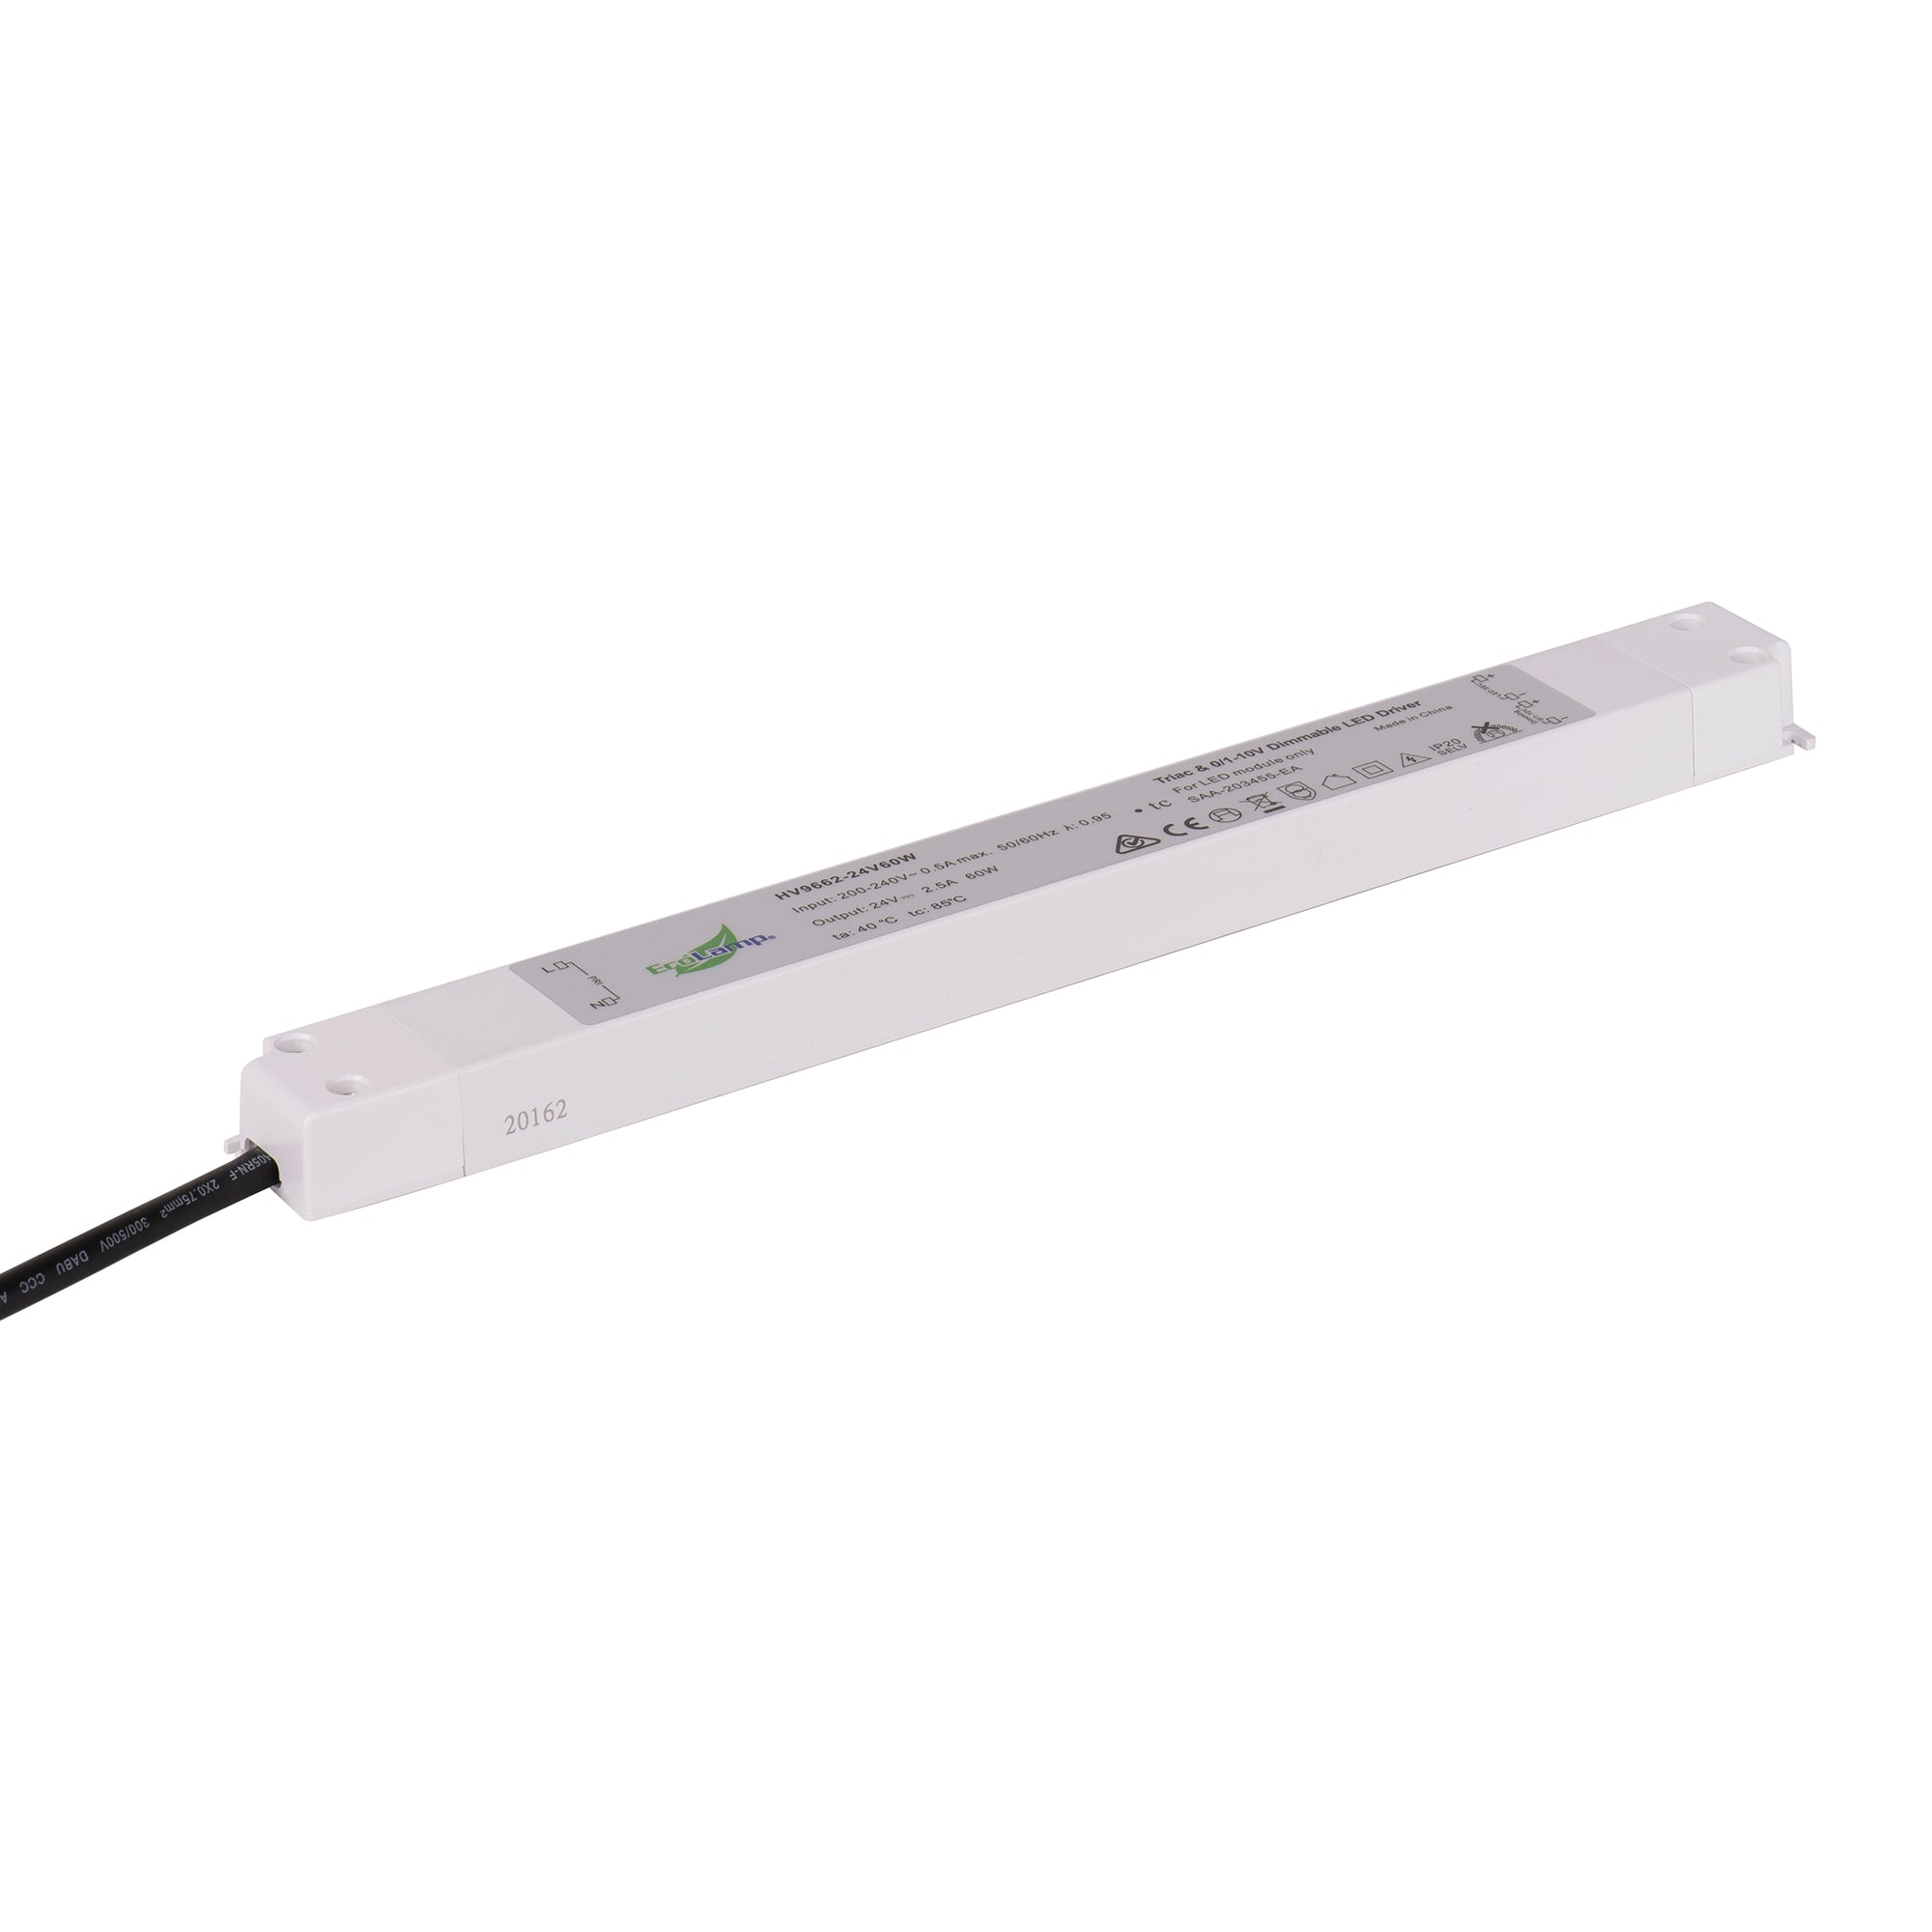 HV9662-60W IP20 Triac + 0-1/10v 2 in 1 Dimmable LED Driver